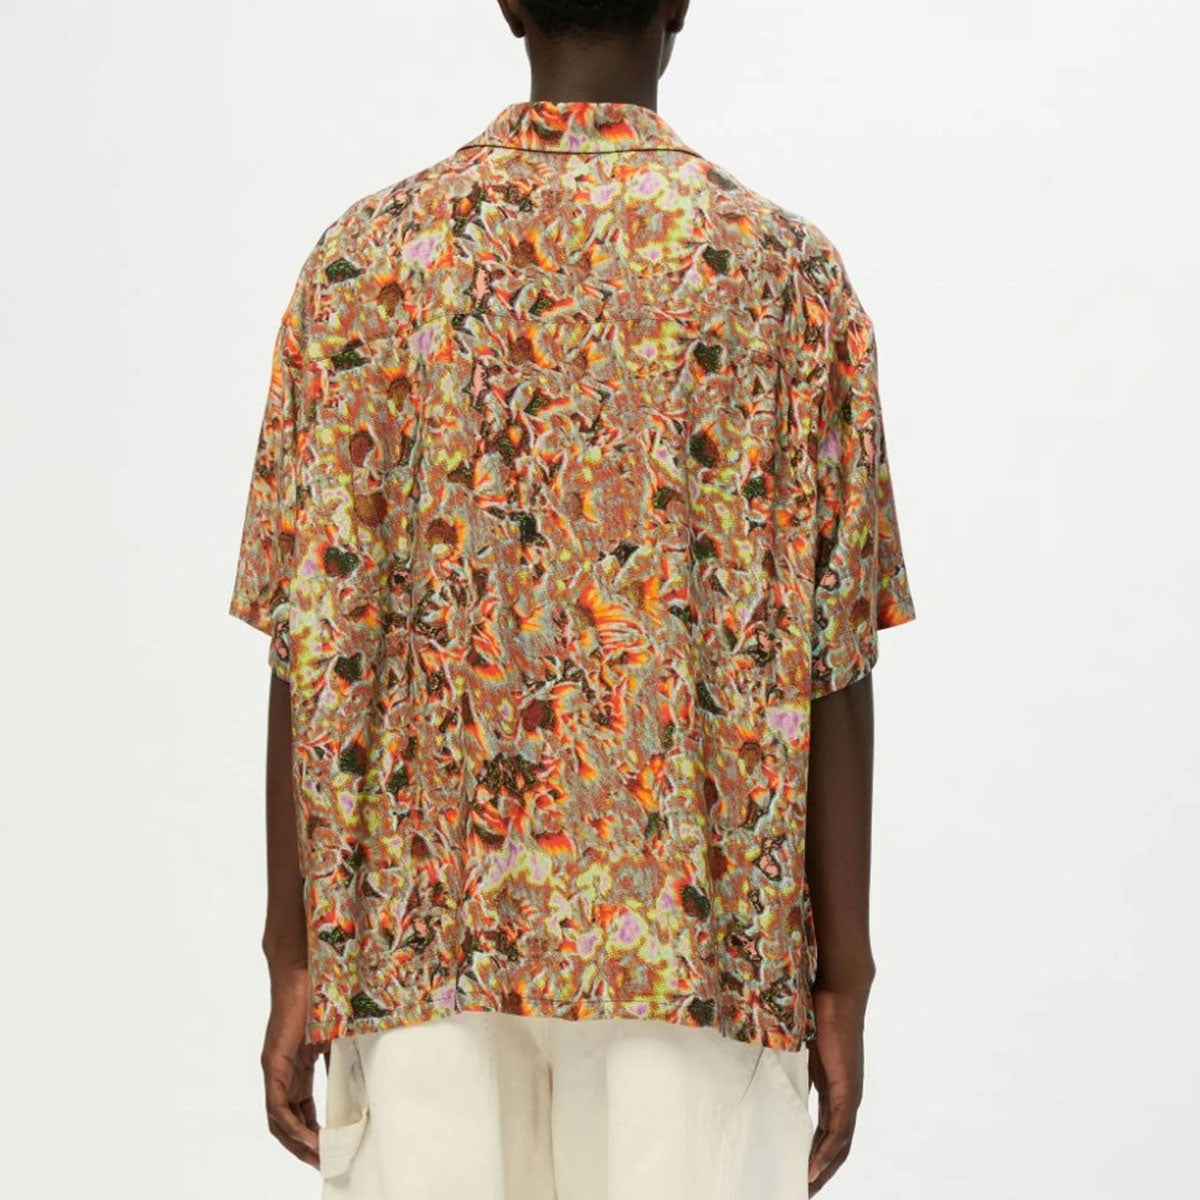 PRINTED S/S SHIRT - Why are you here?